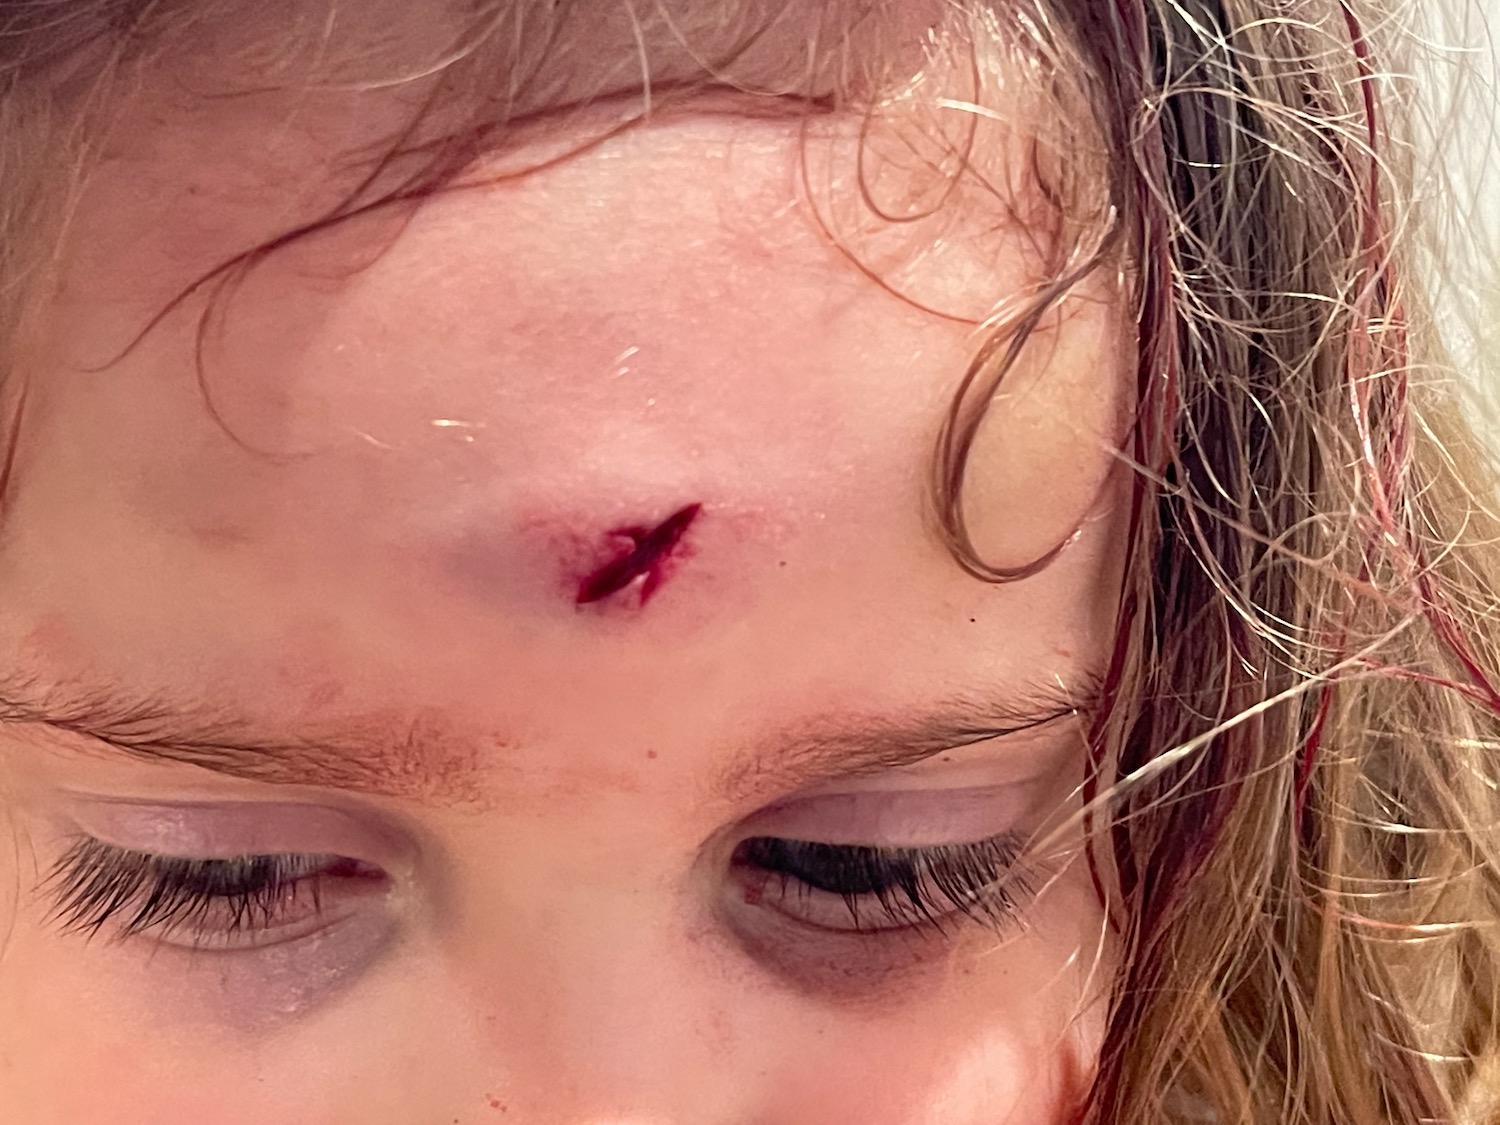 a close up of a wound on a child's forehead